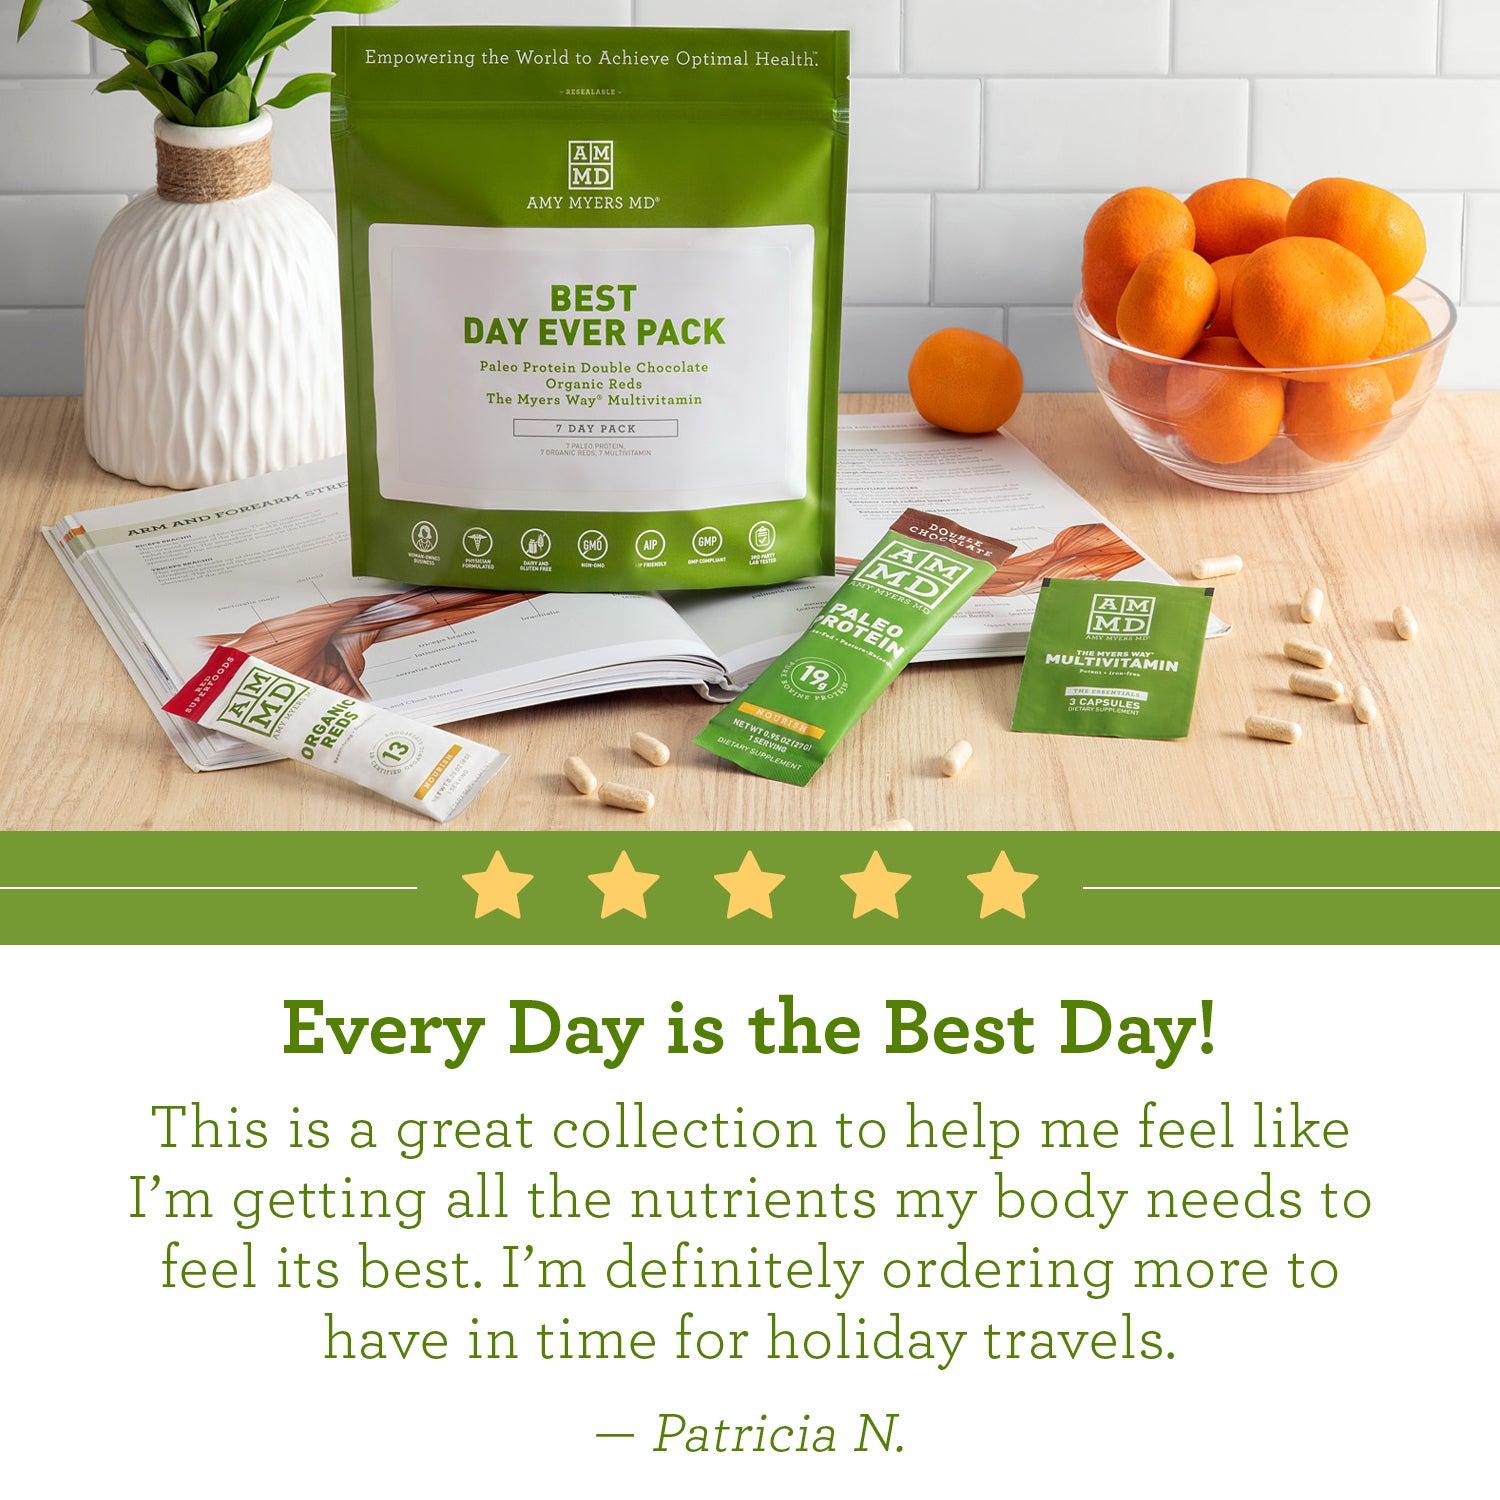 A pouch of the Best Day Ever Pack with individual single serve packets of Paleo Protein Double Chocolate, Organic reds, and The Myers Way® Mutlivitamin - Customer Review - Amy Myers MD